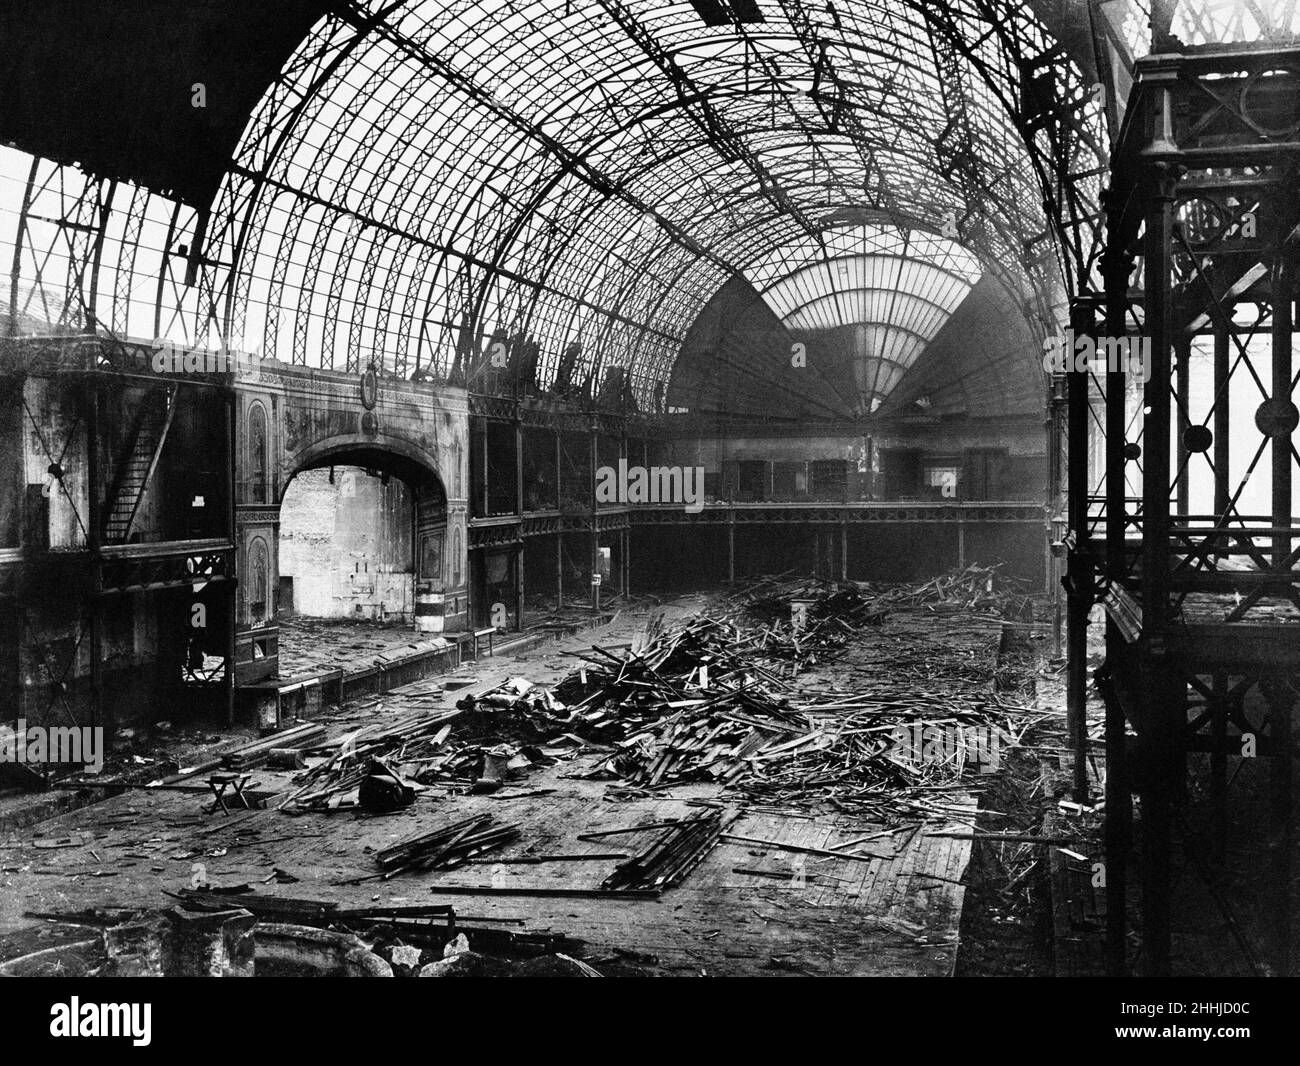 Demolition of The Royal Aquarium and Winter Garden in Westminster. The building opened 1876 it was located immediately to the west of Westminster Abbey on Tothill Street. Designed by Alfred Bedborough in a highly ornamental style faced with Portland stone. At the west end of the building was the Aquarium Theatre renamed in 1879 The Imperial Theatre. The building was demolished in 1903. Westminster Central Hall is now located on the site. Circa 1903 Stock Photo